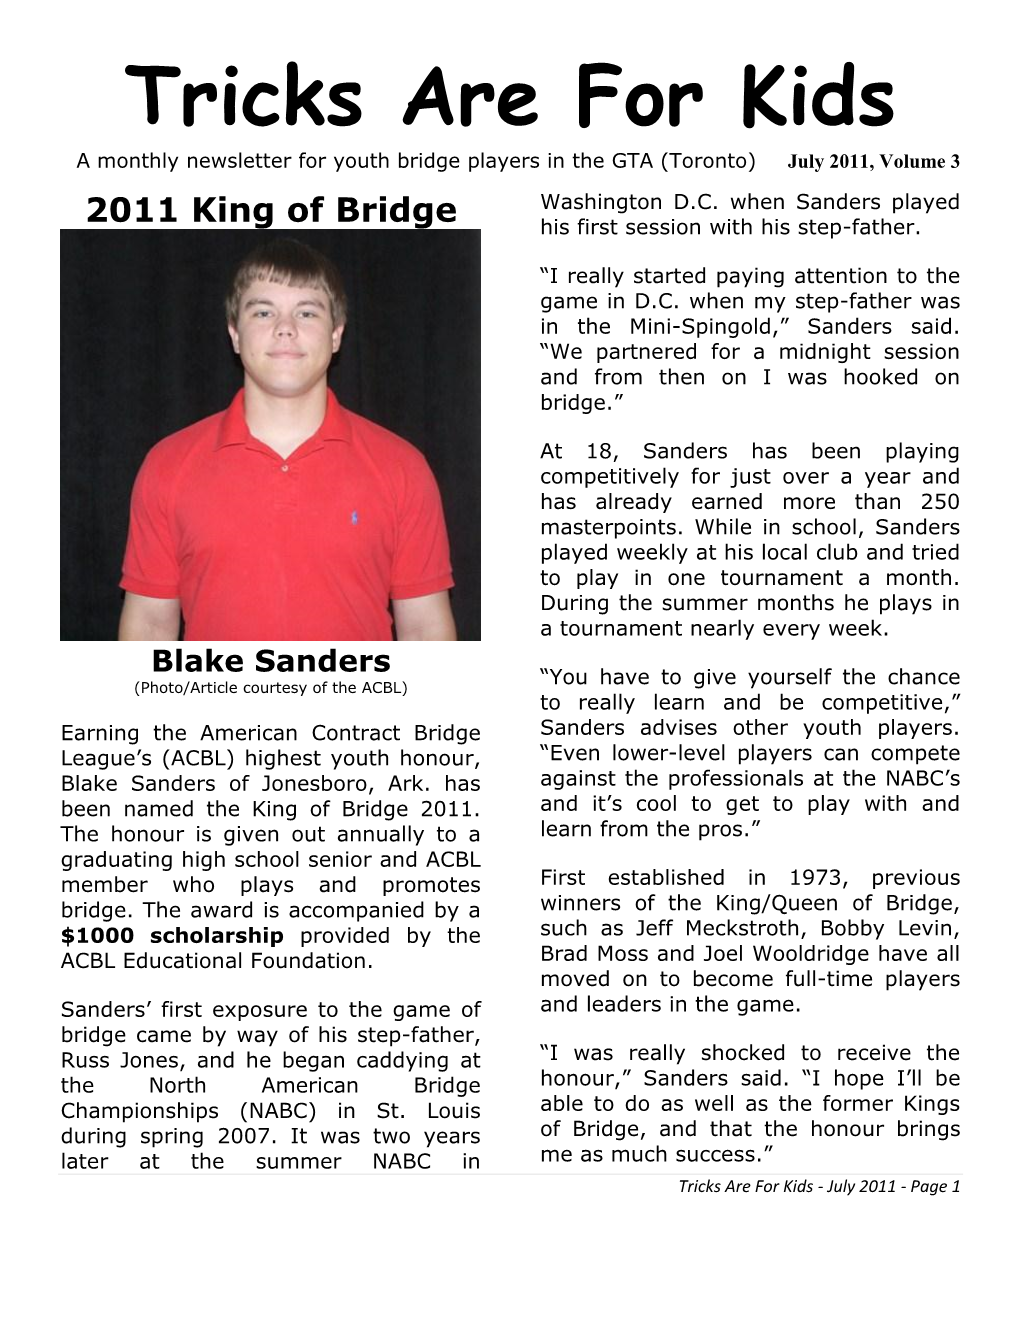 Tricks Are for Kids a Monthly Newsletter for Youth Bridge Players in the GTA (Toronto) July 2011, Volume 3